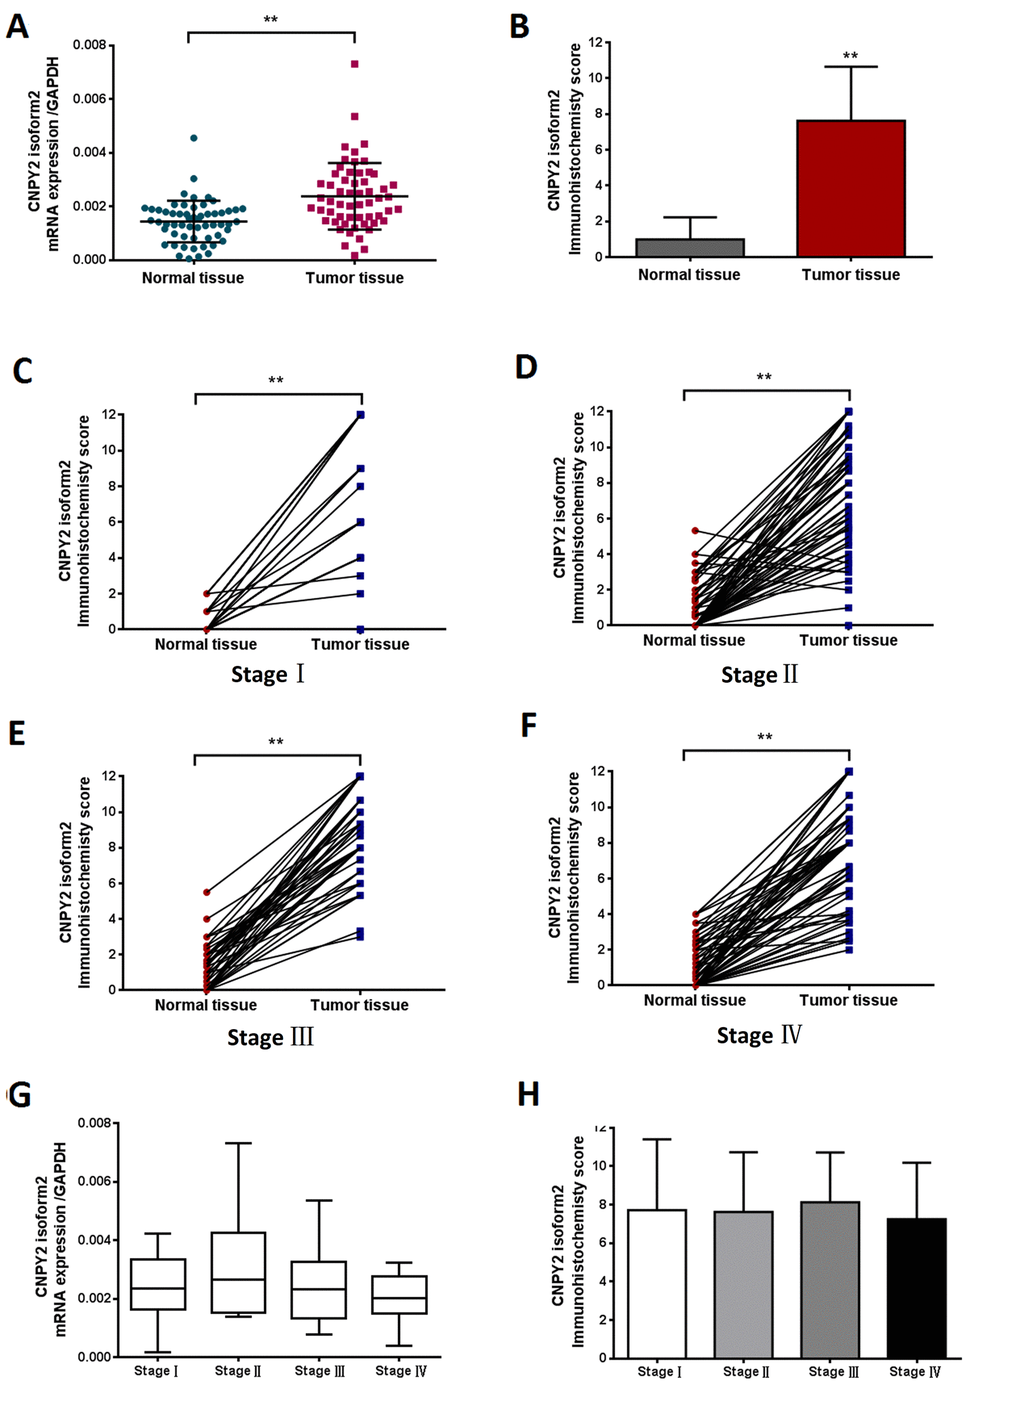 CNPY2 isoform2 expression in CRC tissues detected by RT-PCR and TMA-IHC. (A) Preferential expression of CNPY2 isoform2 mRNA was observed in CRC tissues compared matched tumor-adjacent normal tissues, (n = 57, **, P B) Increased expression of CNPY2 isoform2 protein was detected in tumor tissues compared to matched tumor-adjacent normal tissues among all patients (n = 285, 7.6 ± 0.2 vs. 1.0 ± 0.1, **, P C-F) Increased expression of CNPY2 isoform2 protein was detected in tumor tissues compared to matched tumor-adjacent normal tissues among patients with stage I-IV disease (C: Stage I,7.7 ± 0.6 vs. 0.5 ± 0.1; D: Stage II,7.4 ± 0.3 vs. 1.0 ± 0.2; E: Stage III,8.6 ± 0.3 vs. 1.3 ± 0.2; F: Stage IV,7.5 ± 0.4 vs. 1.0 ± 0.2; **, all P G) Expression level of CNPY2 isoform2 mRNA was slightly higher in stage II CRC but did not reach statistical significance compared to that in other stages (n = 57, P > 0.05). (H) CNPY2 isoform2 protein expression was comparable among patients with disease stage I-IV (n =2 85, P > 0.05).